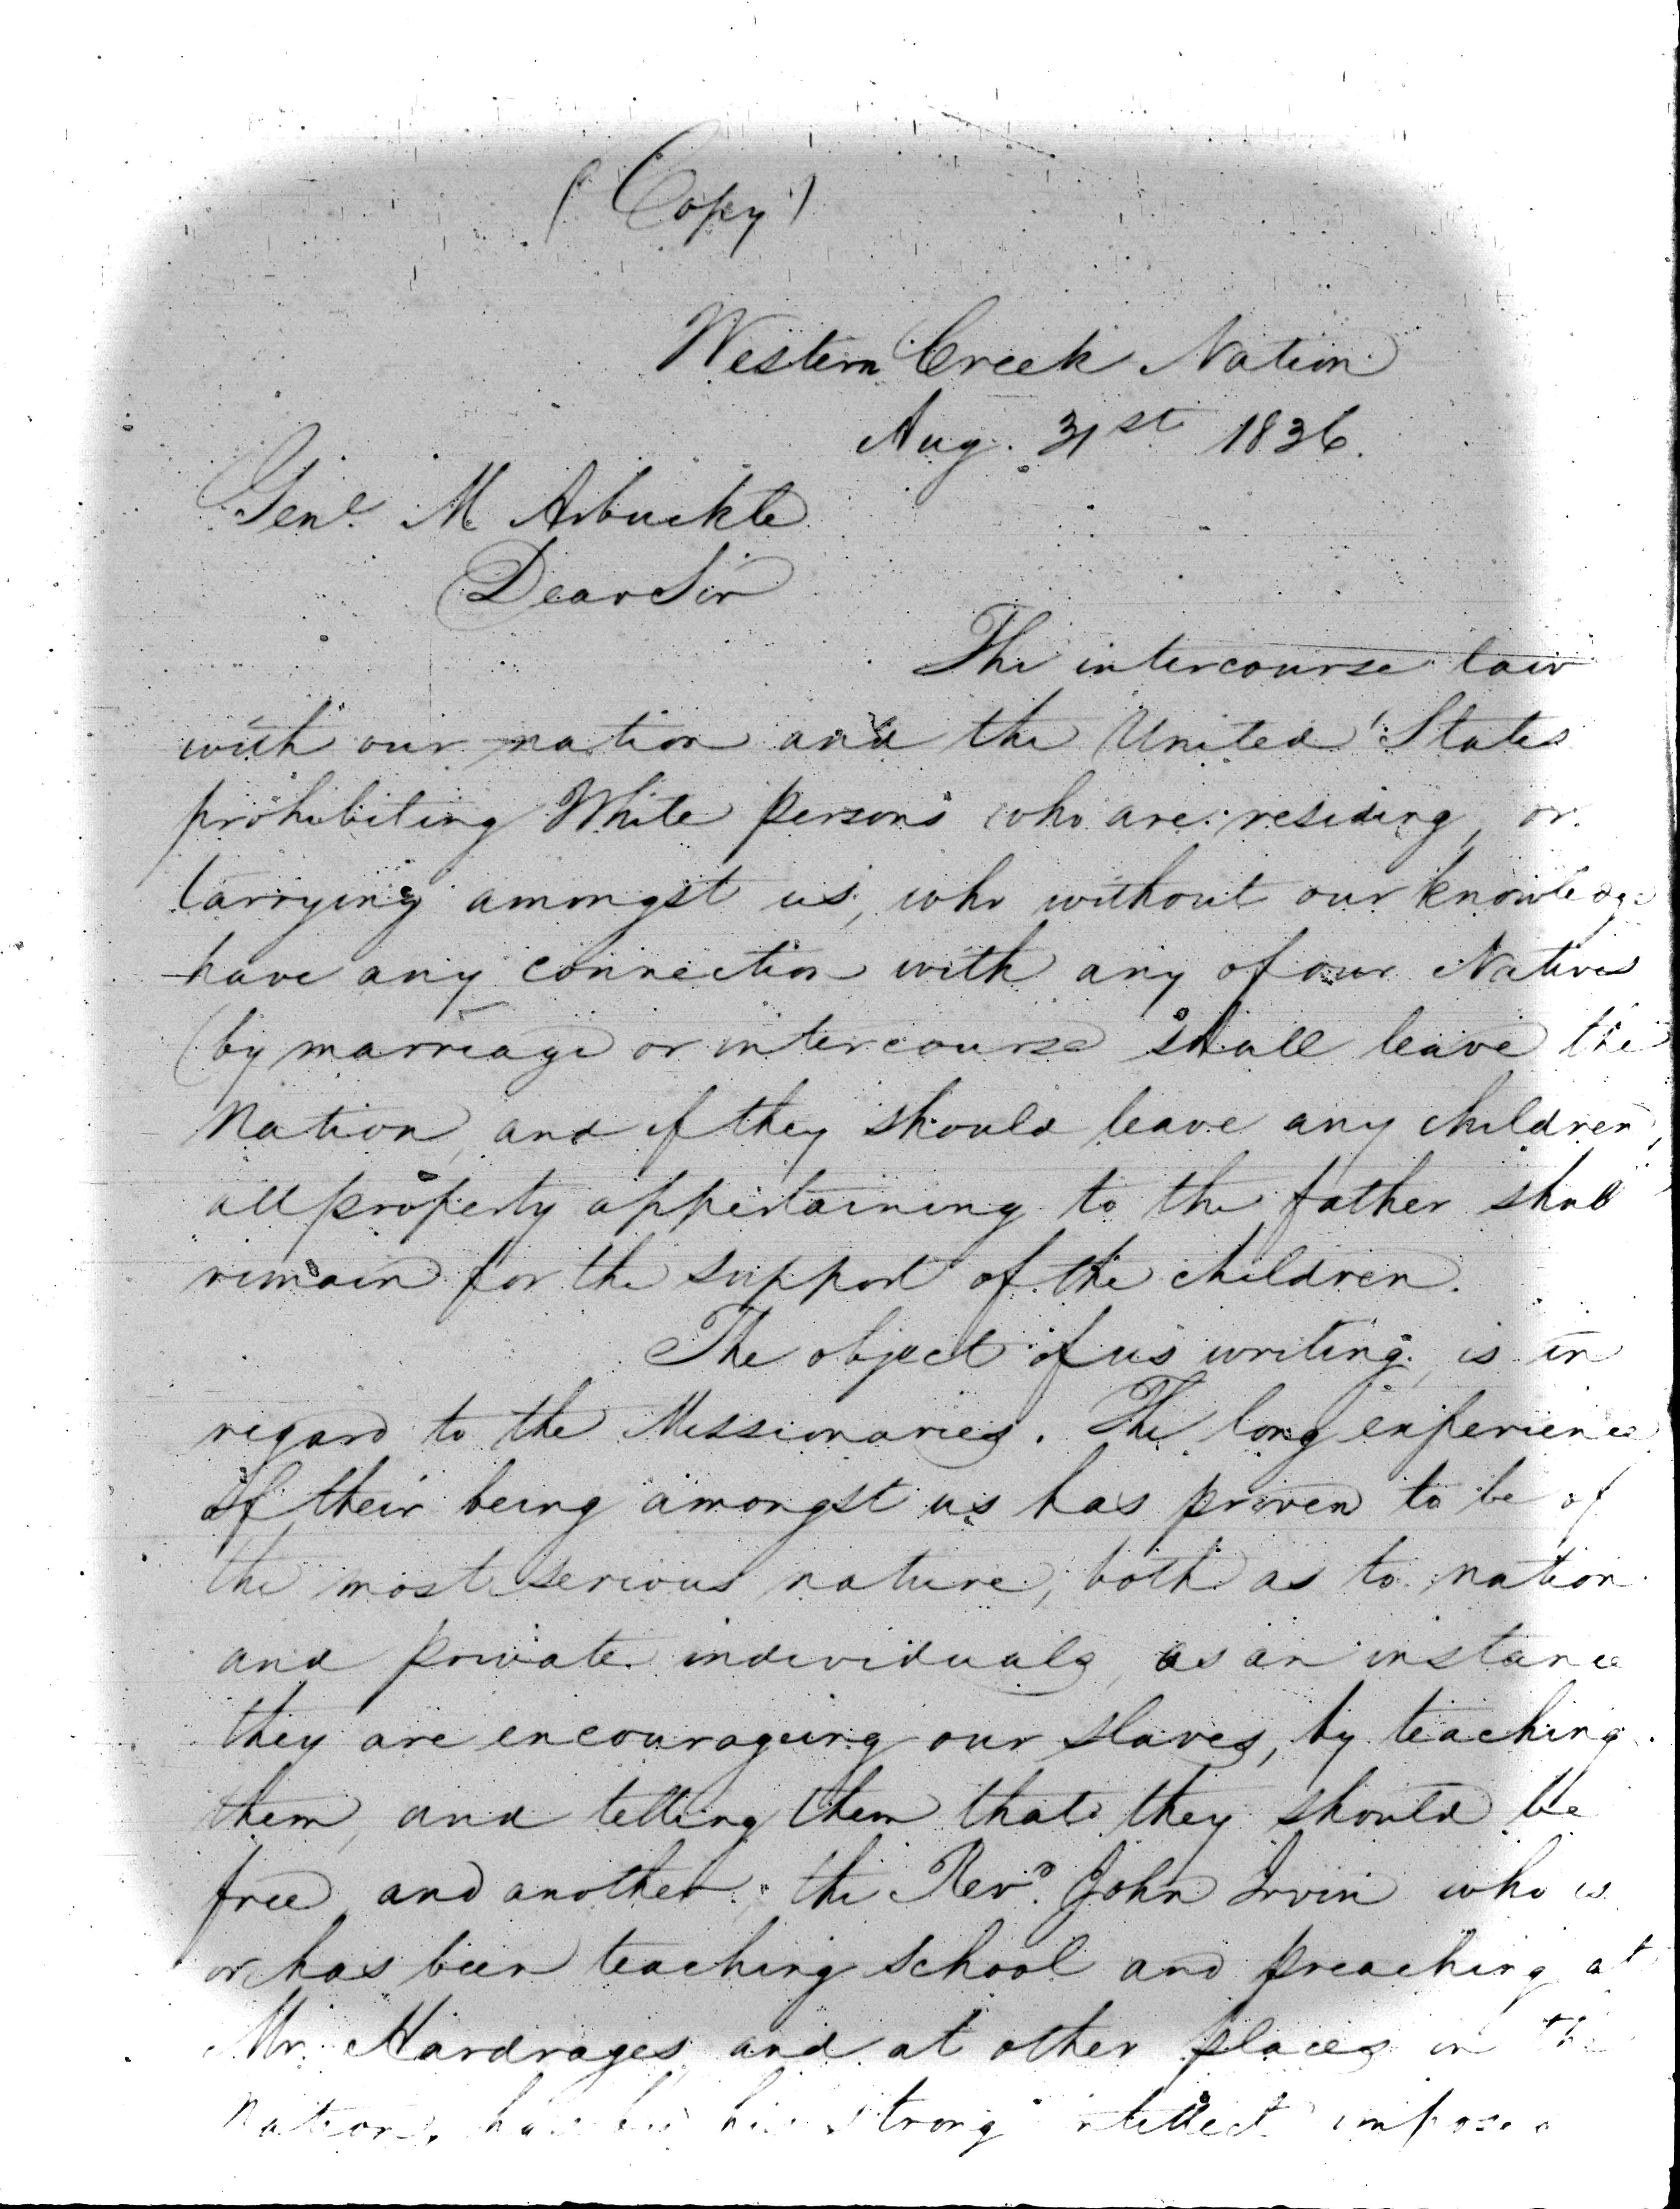 Petition from Roley McIntosh, Chilly McIntosh, and Other Creek Chiefs to Matthew Arbuckle Relating to the Removal of Missionaries from the Creek Nation, Aug. 31, 1836, p 1-2.